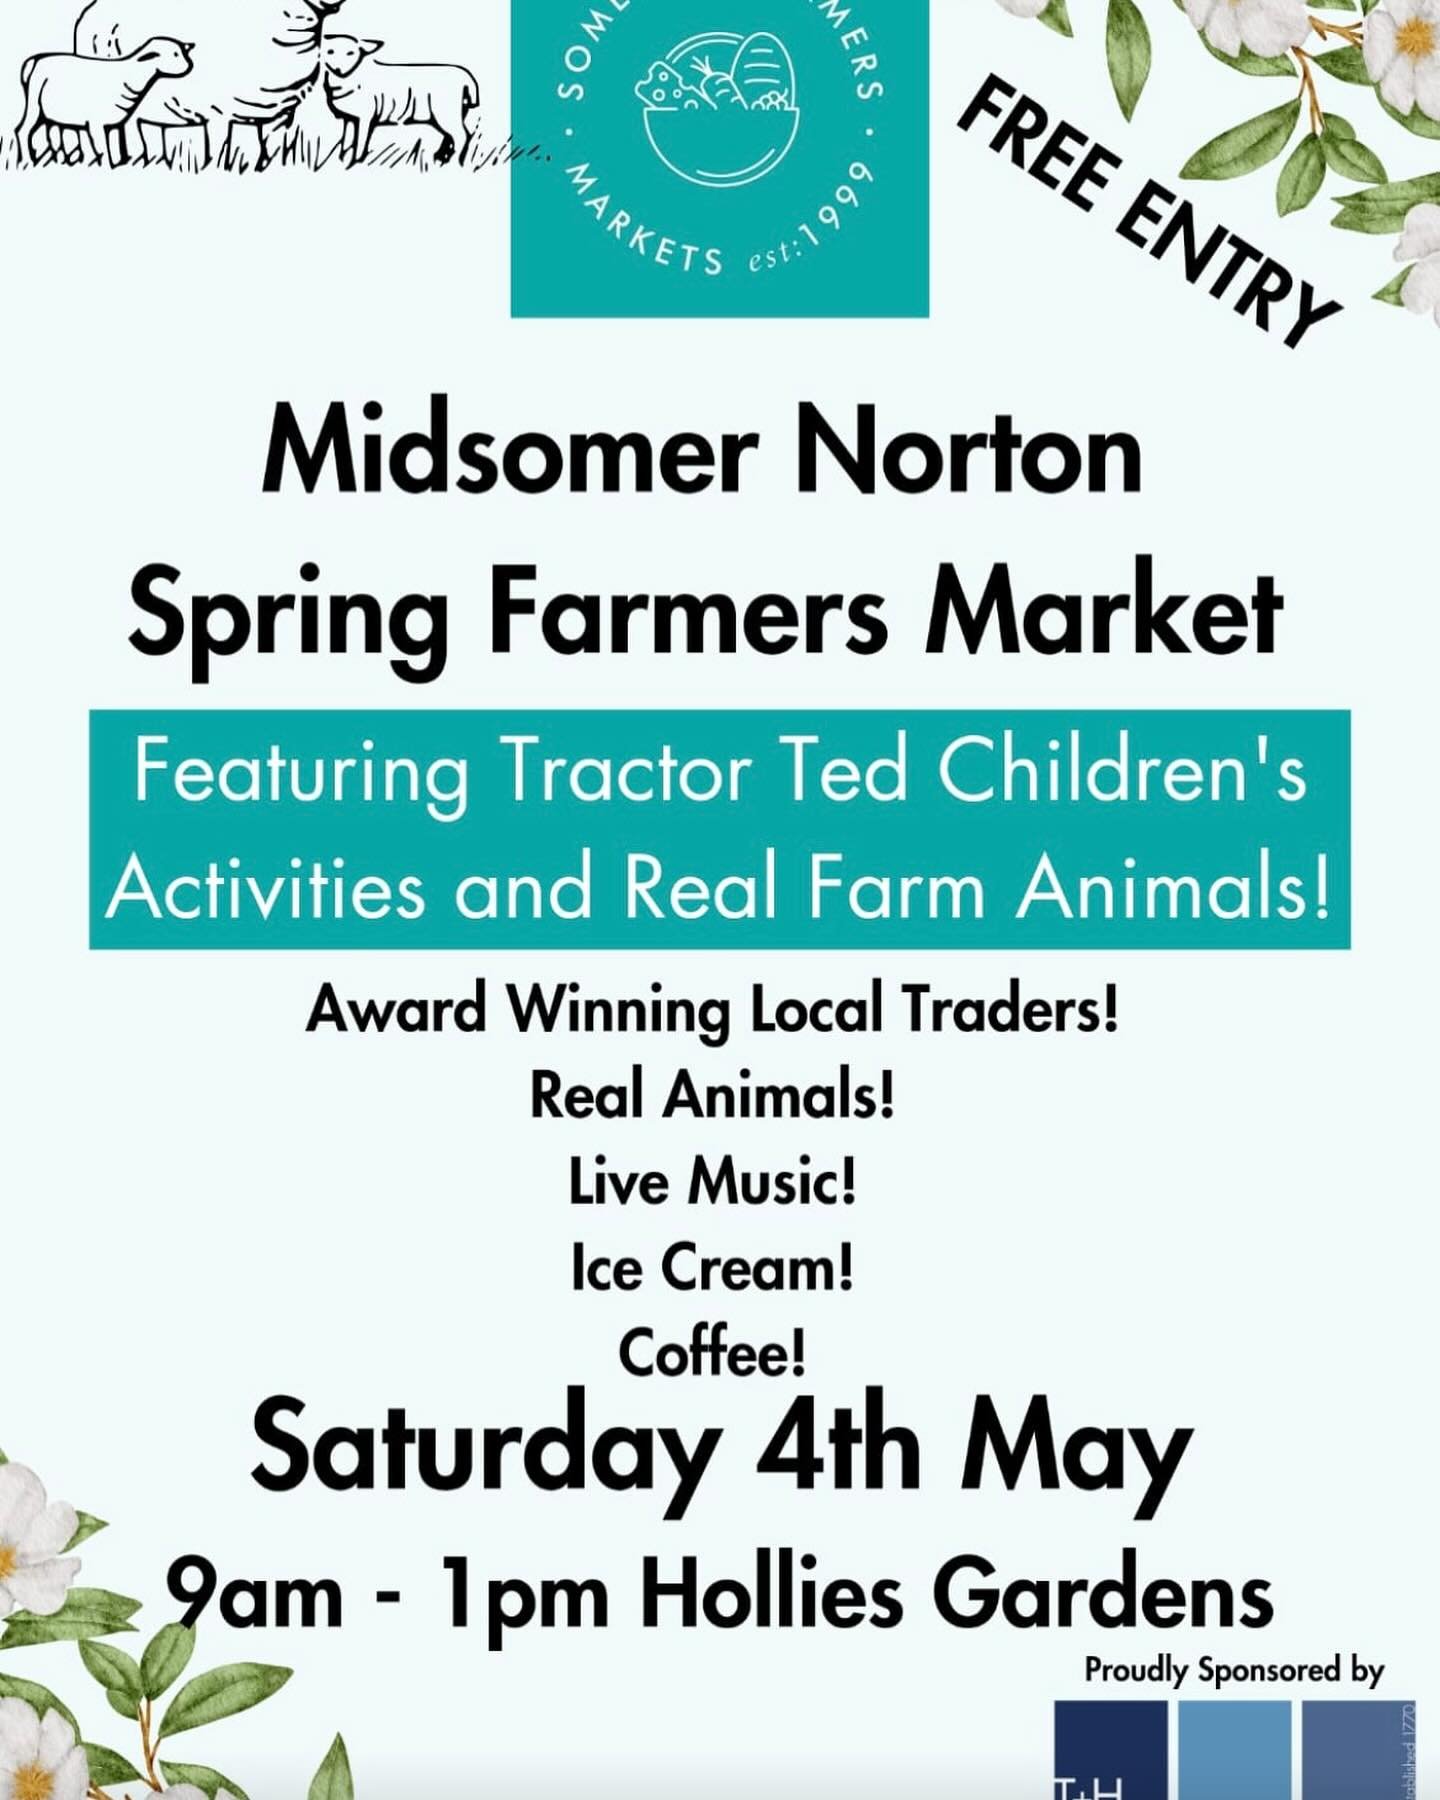 This Saturday I&rsquo;ll be at @somersetfarmersmarketsuk Midsomer Norton Farmer&rsquo;s market, 9am-1pm. Drop by and say hi if you&rsquo;re around.
I&rsquo;ll have my range of preserves plus limited edition Strawberry Jam, Wild Garlic Pesto and Wild 